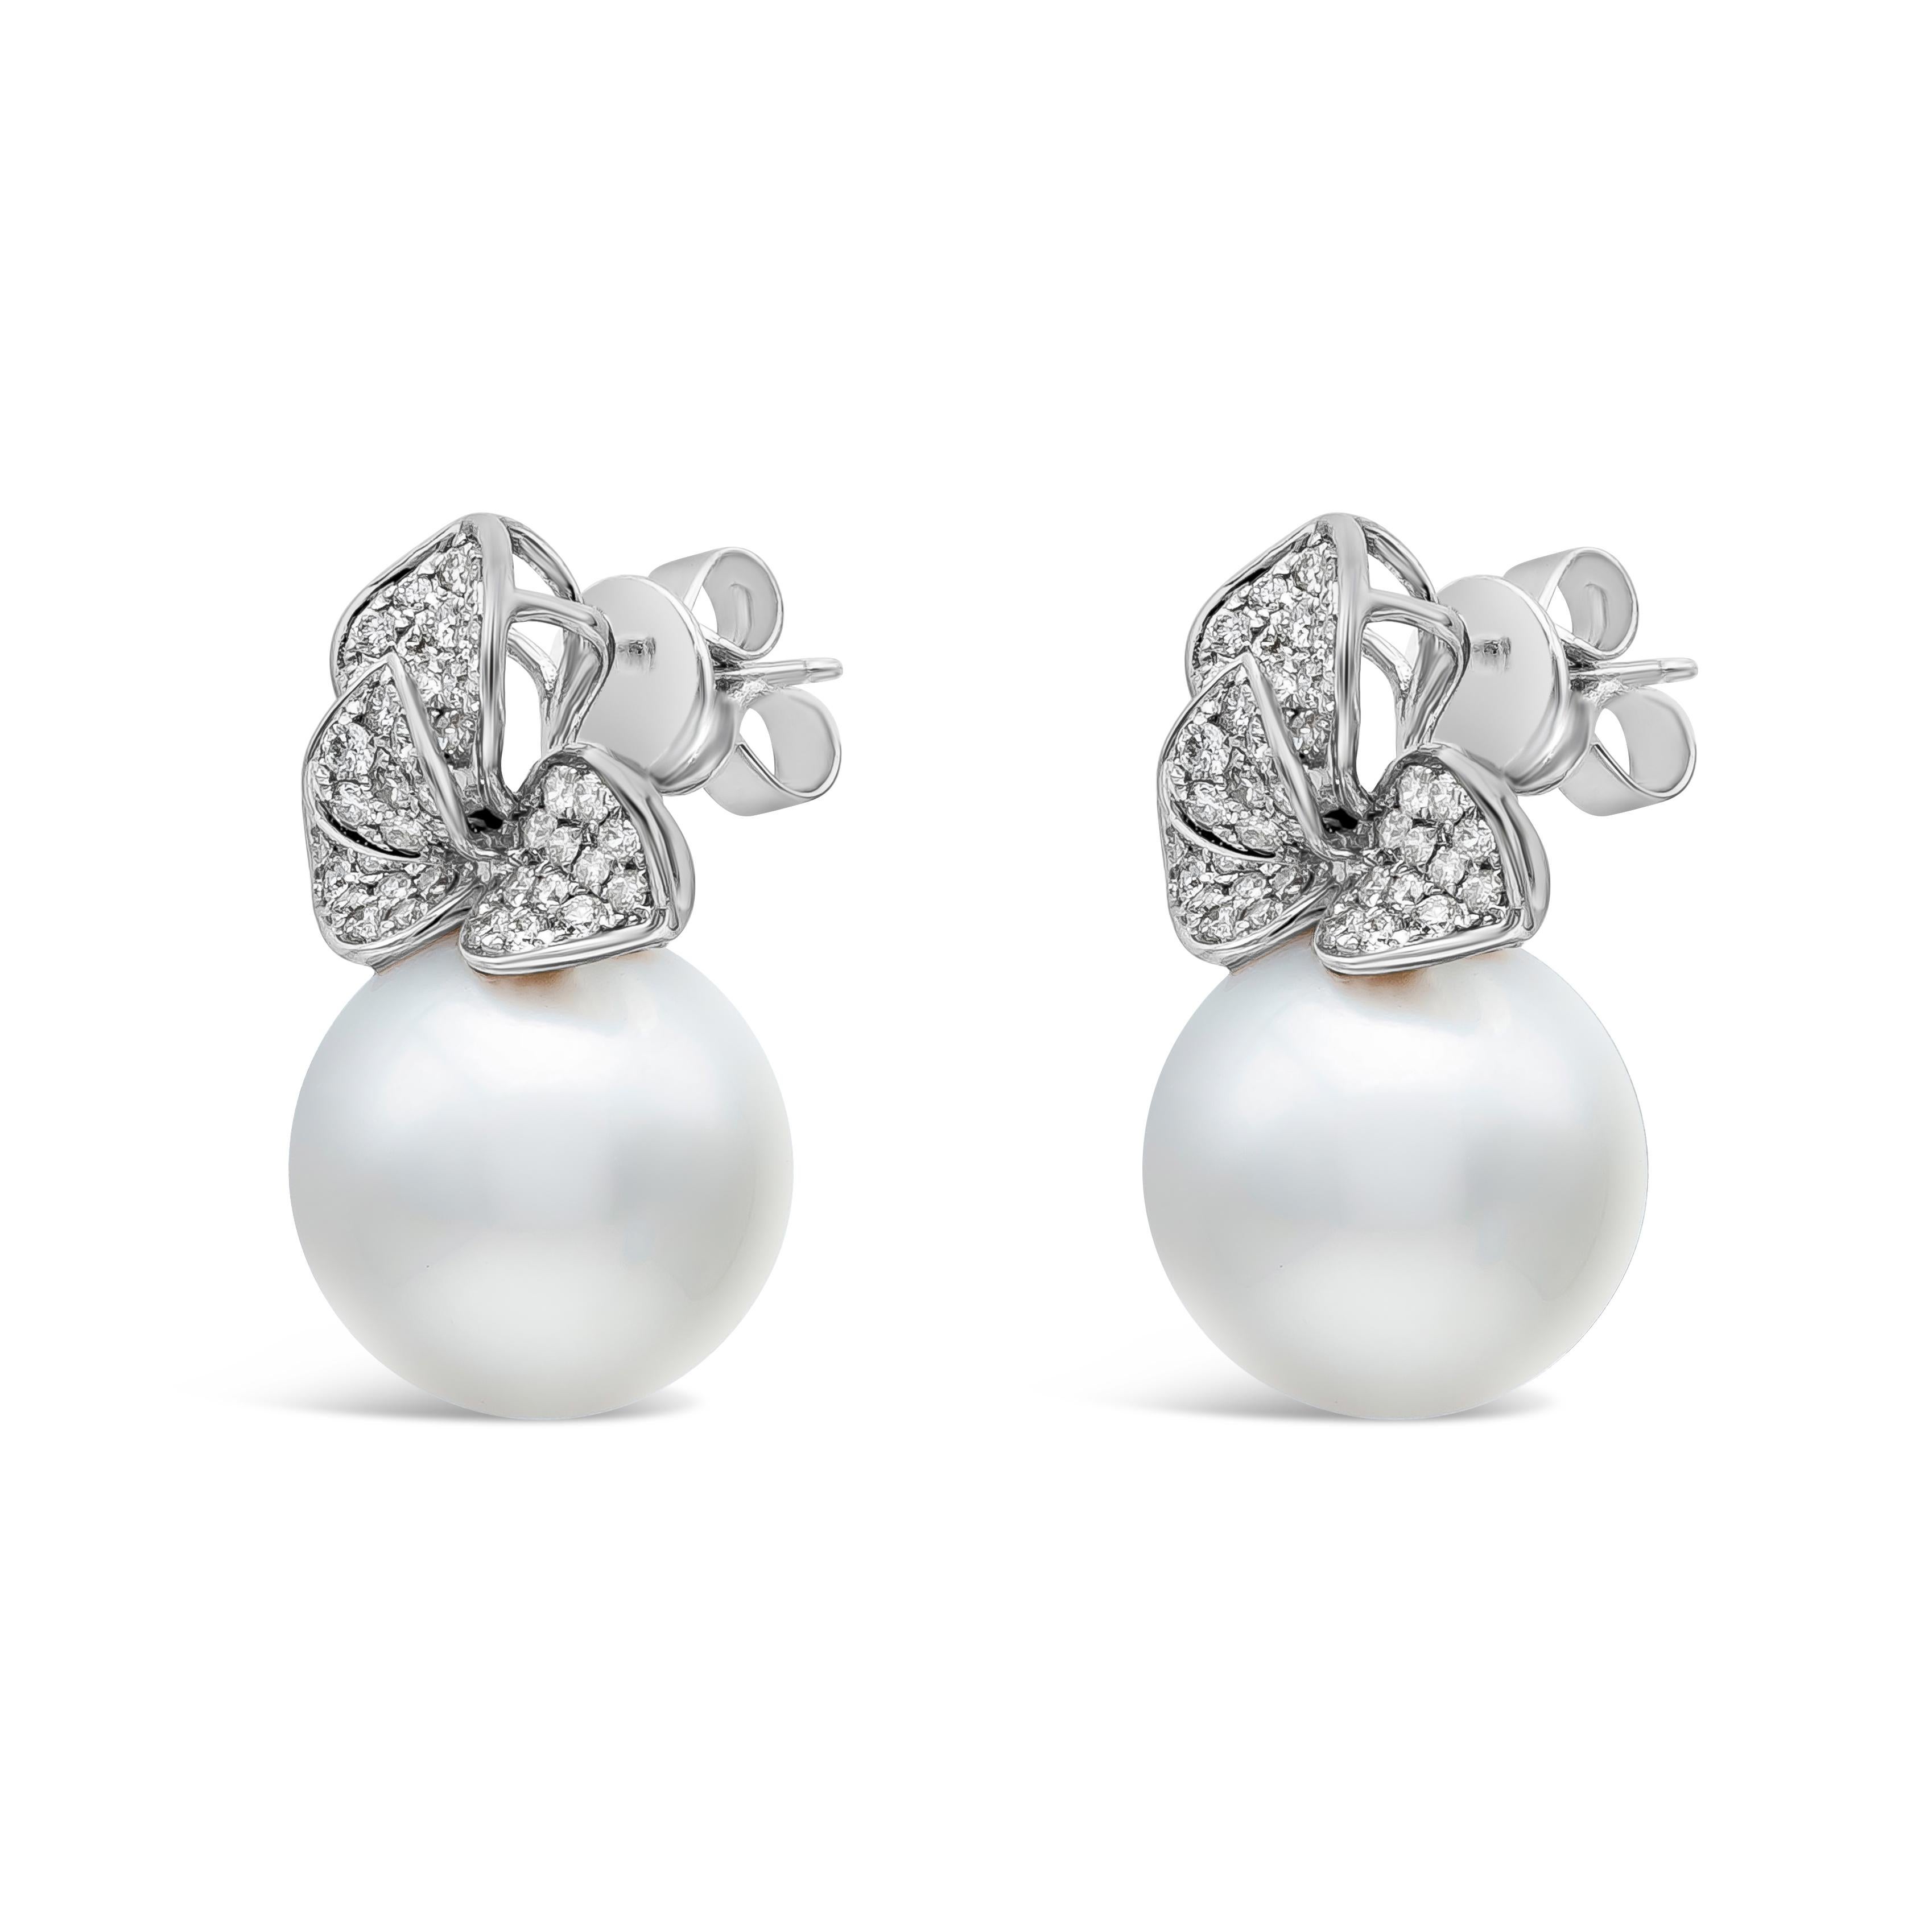 This beautiful earrings are showcasing 13-14 mm south sea pearls. Earrings consist of 96 round cut diamonds weighing 0.98 carats total, suspended on a diamond encrusted flower design made in 18K White Gold.

Style available in different price